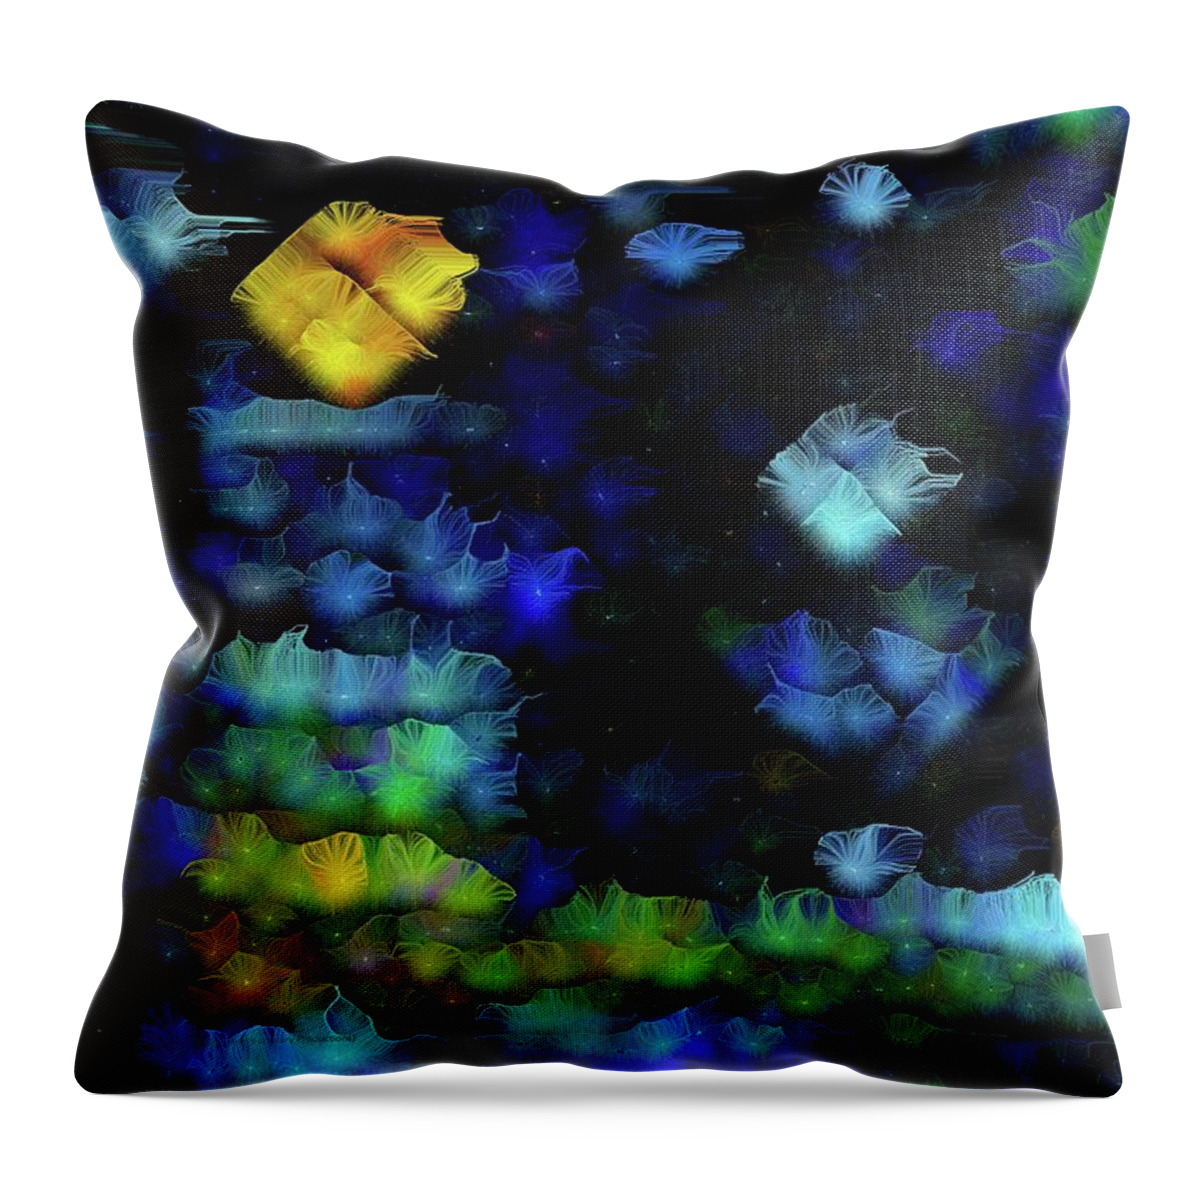 Stars Throw Pillow featuring the painting Another Starry Starry Vincent Van Gogh Social Distance Night Number 1 by Aberjhani